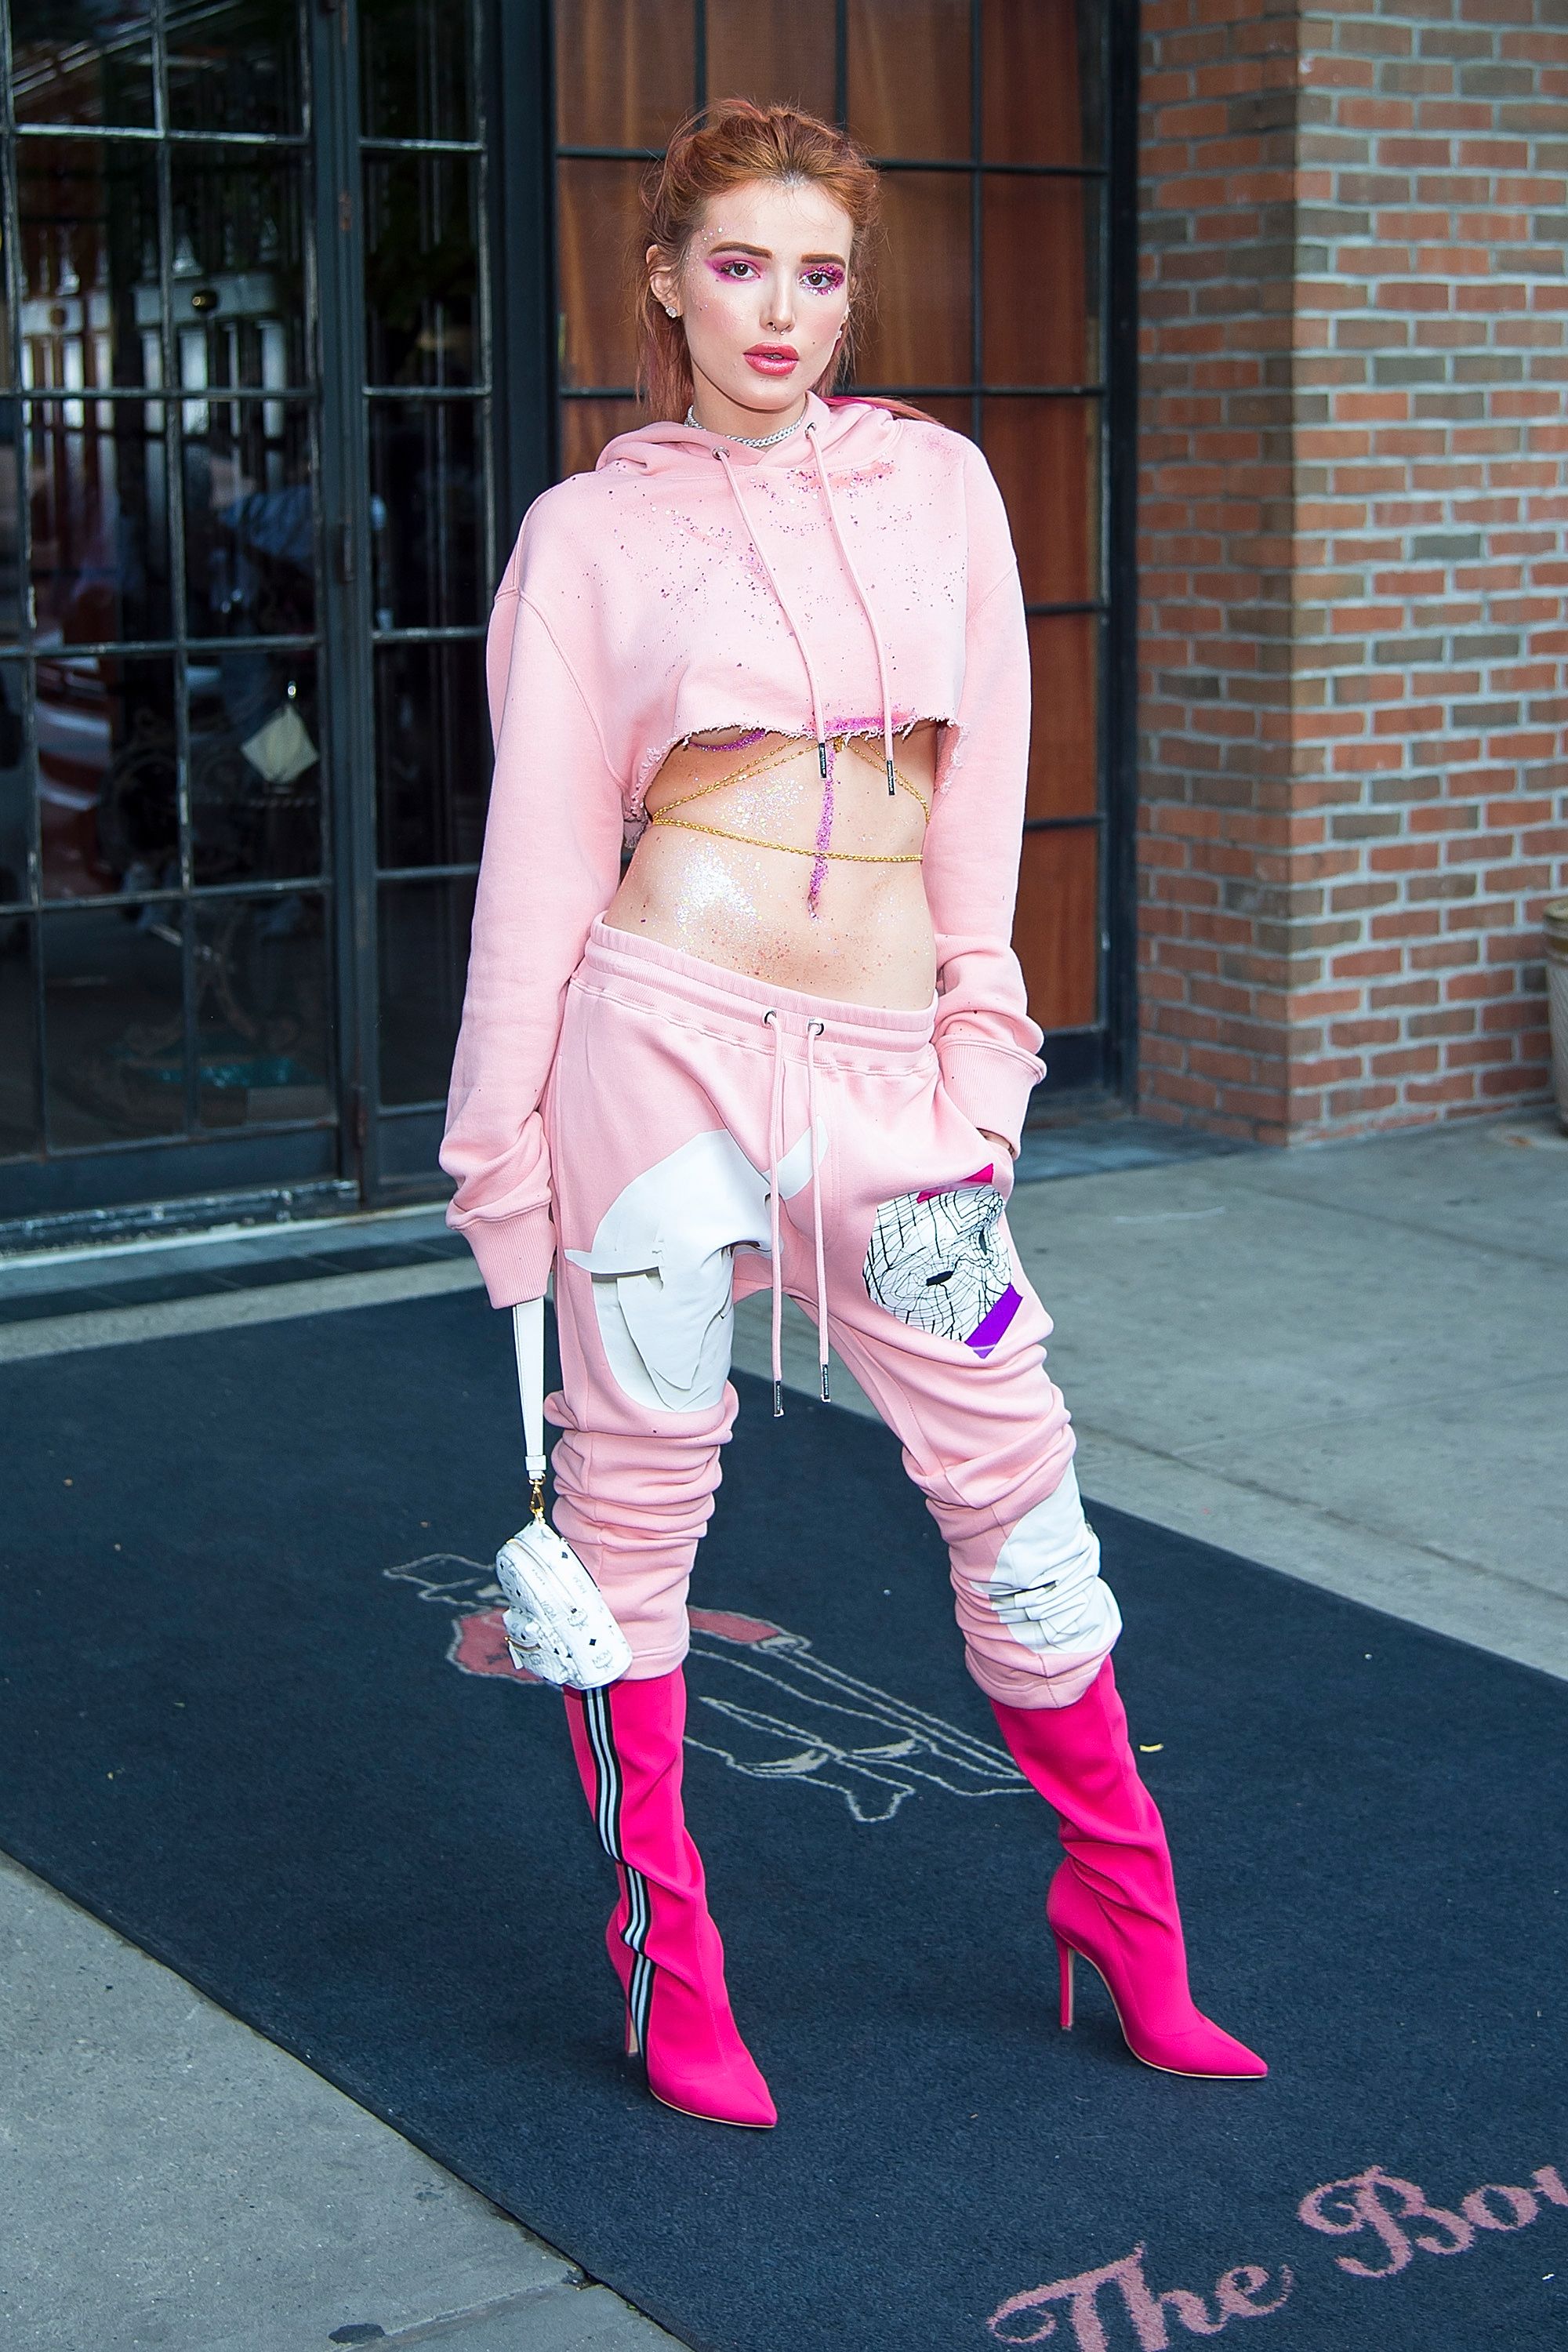 Bella Thorne rocked some serious underboob in this all-pink look